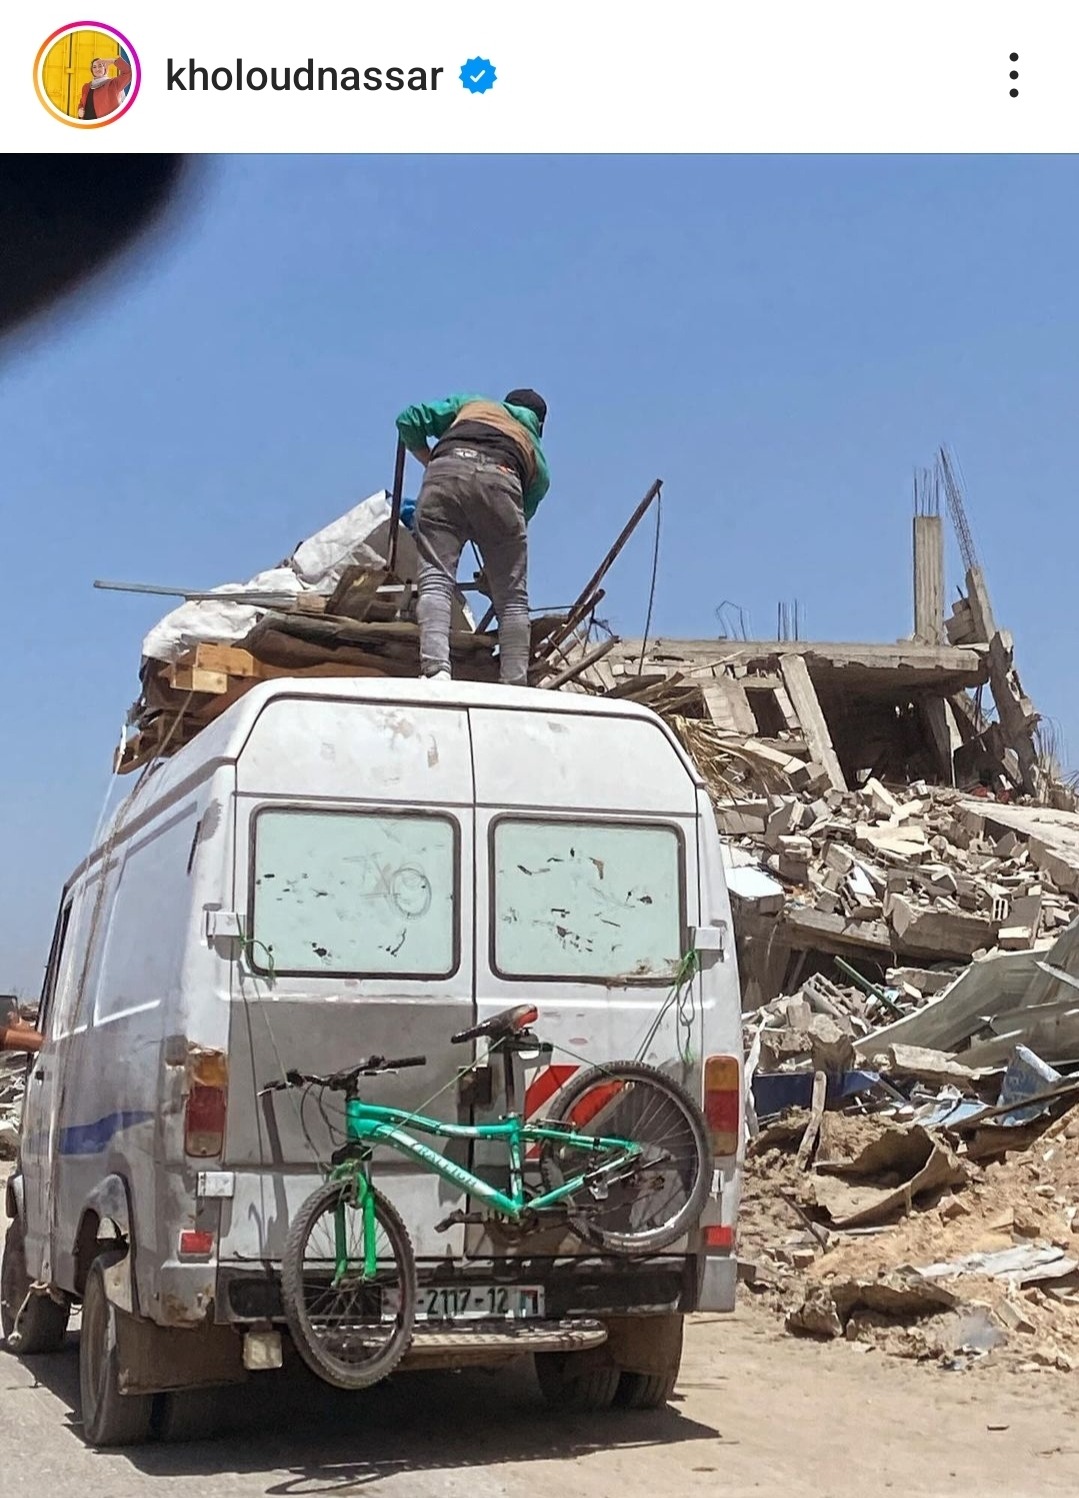 A van driving down a dusty road. Rubble of bombed buildings line the road. There's a bicycle hitched to the back of the van.